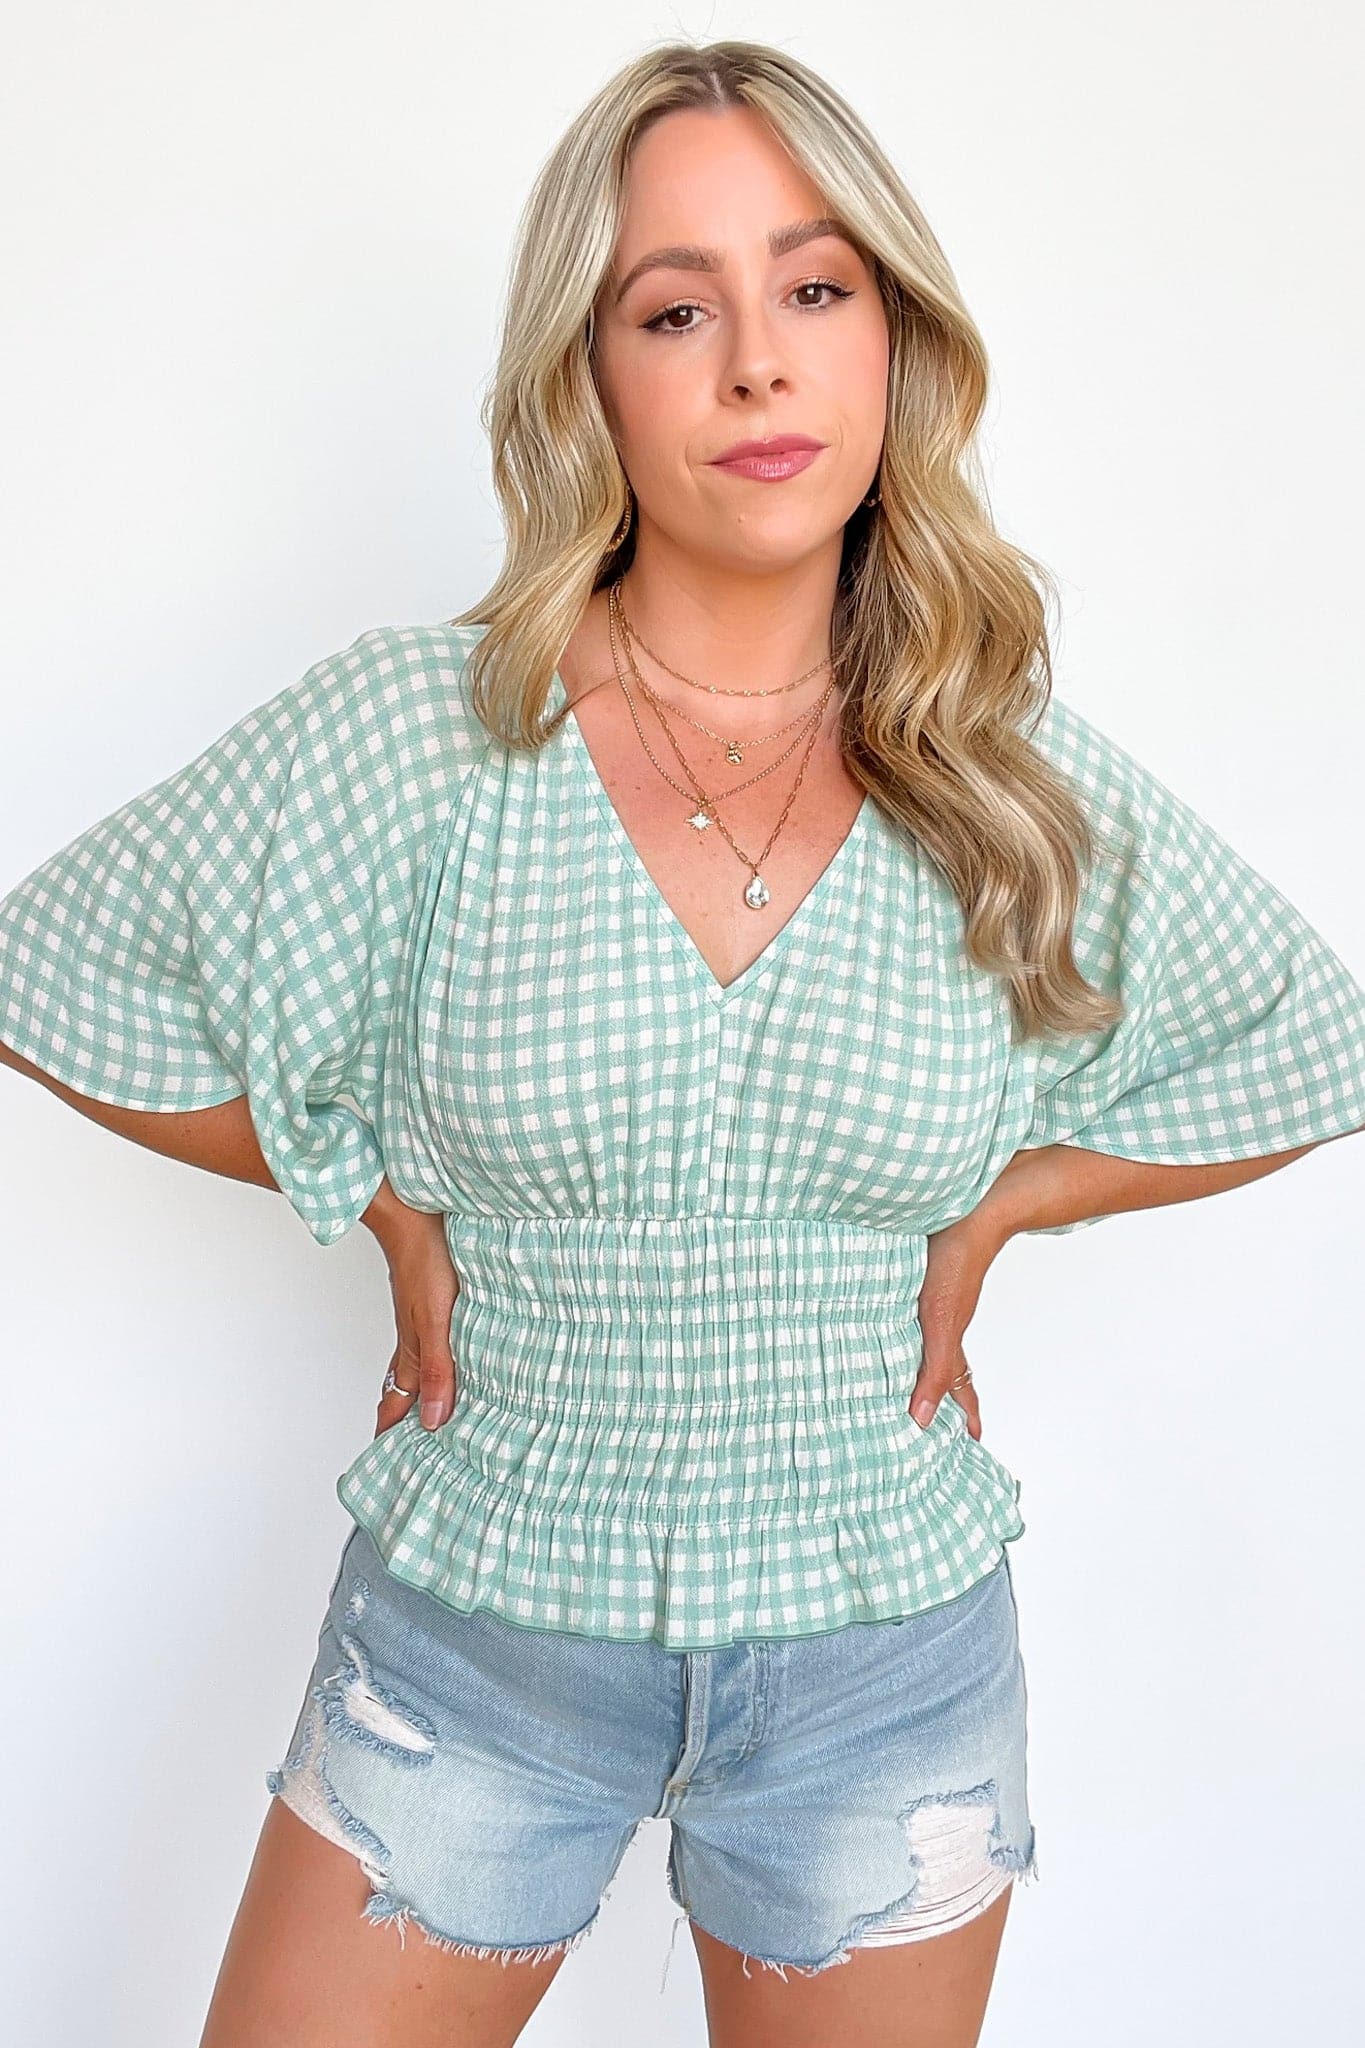  So Delighted Gingham Peplum Top - FINAL SALE - Madison and Mallory